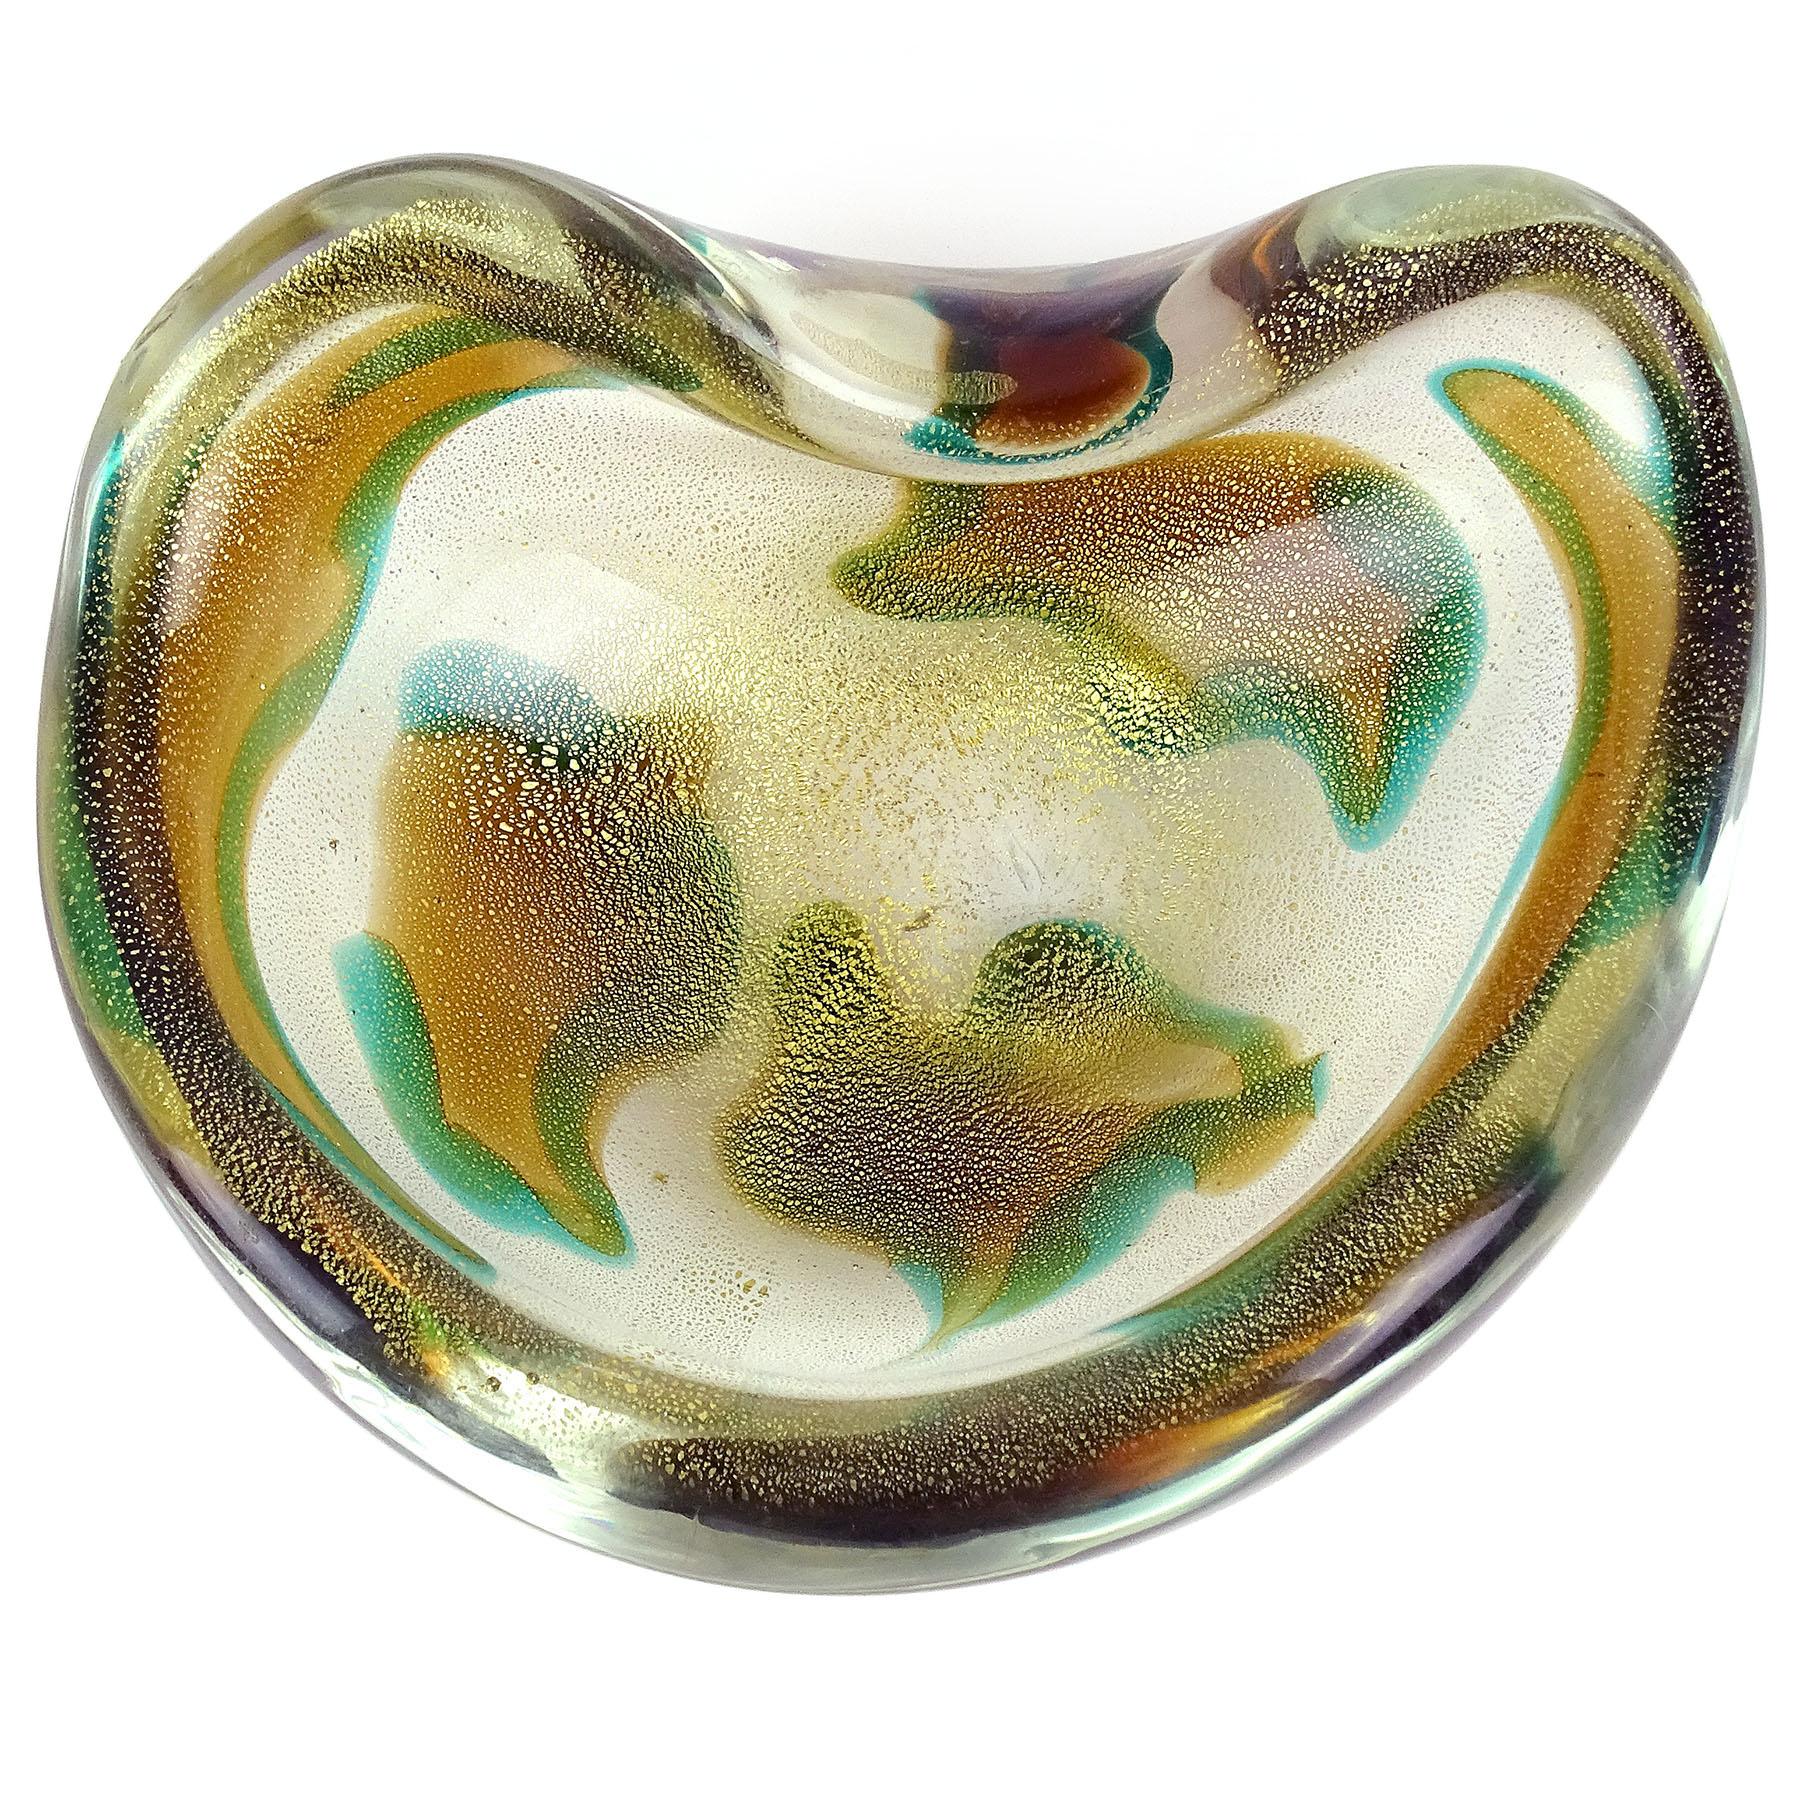 Beautiful vintage Murano hand blown Sommerso green, orange amber spots and gold flecks Italian art glass decorative bowl. Documented to designer Archimede Seguso, circa 1952. This design has been published in many Seguso books and catalogs. The bowl